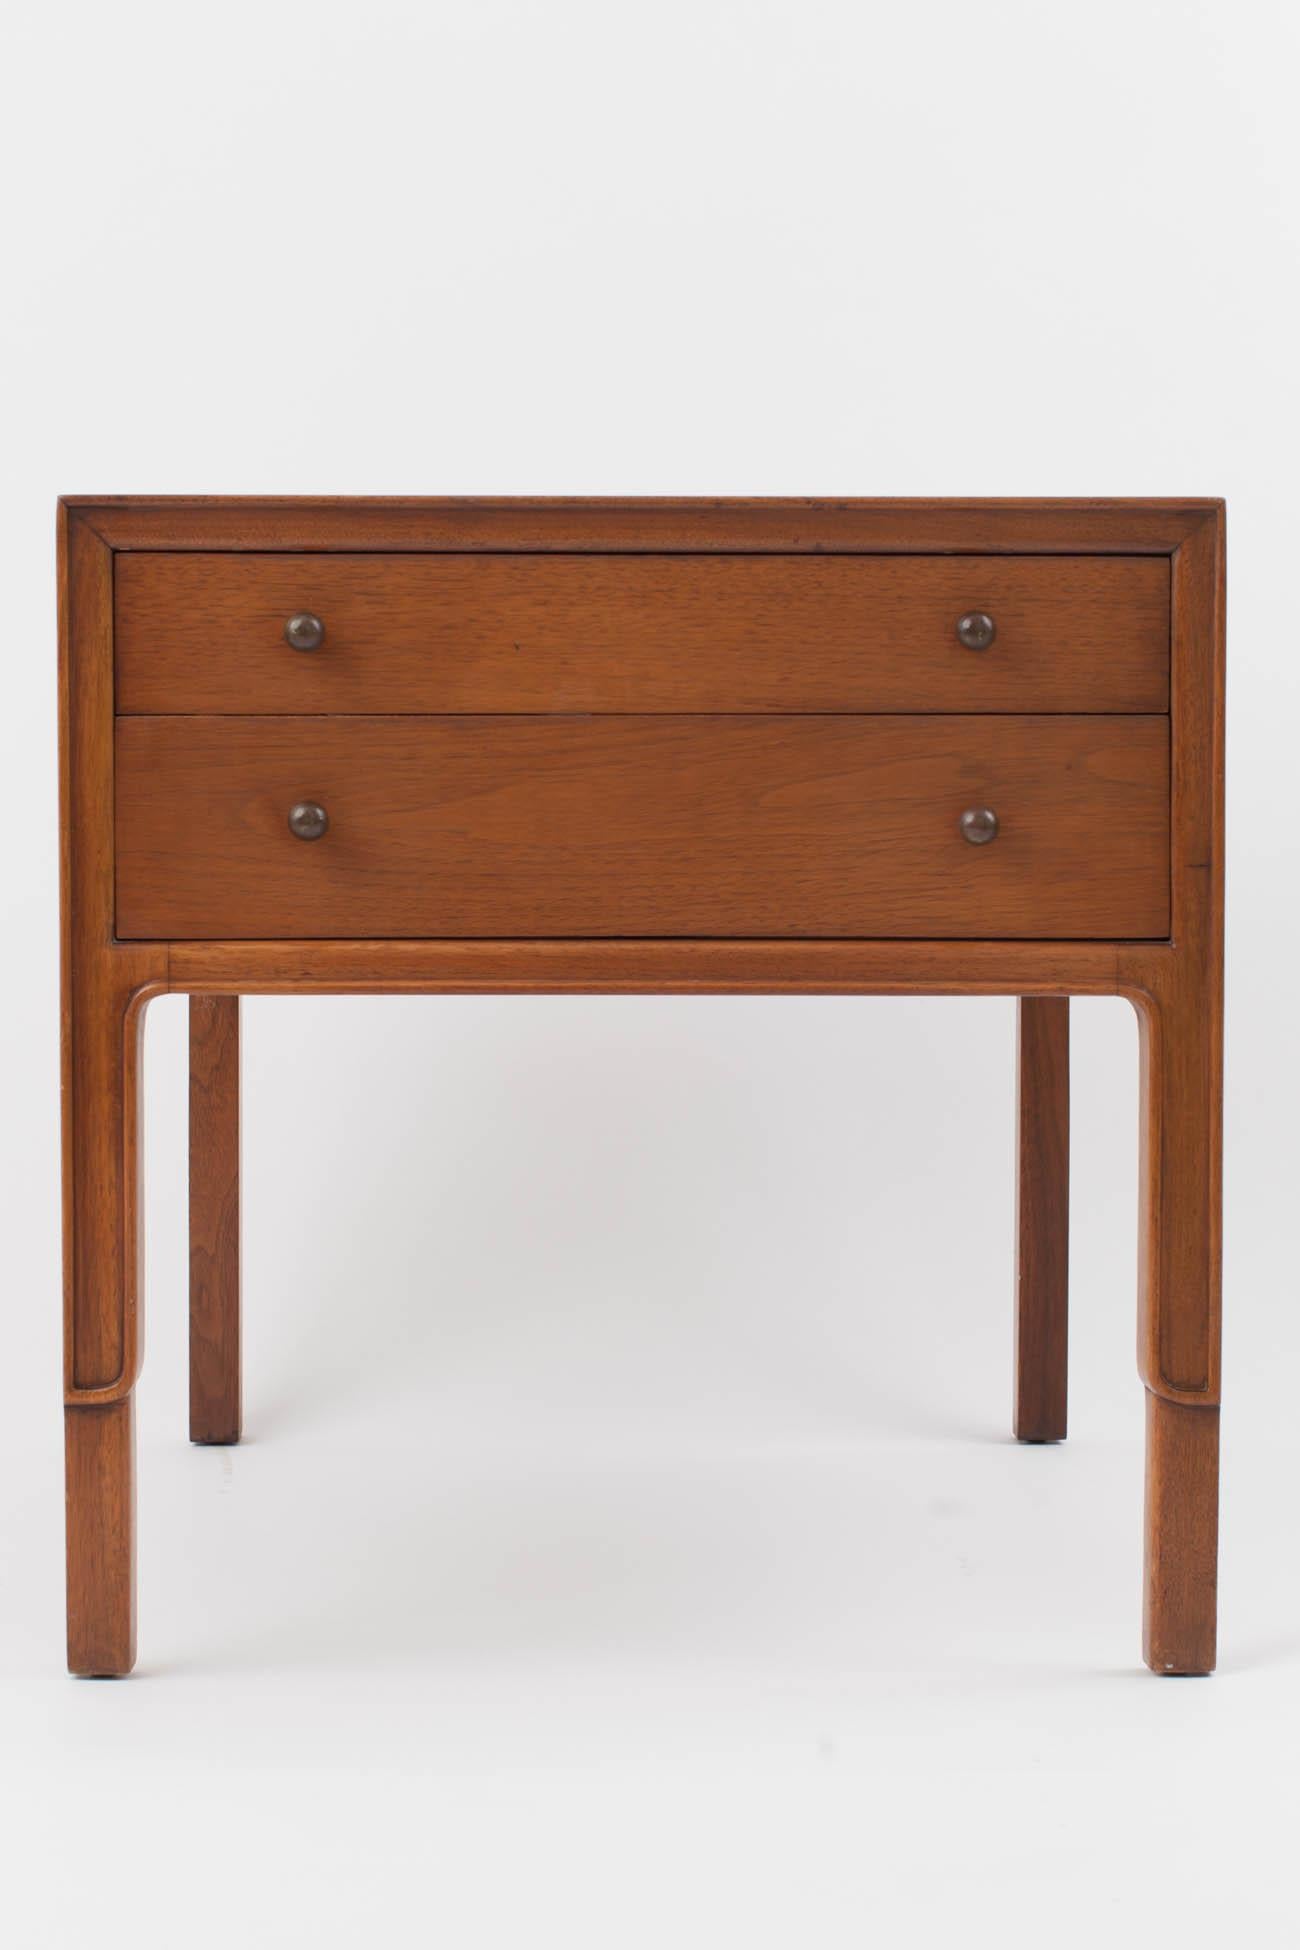 United States, 1960s

Pair of Janus midcentury nightstands by John Stuart for Mt. Airy, in mahogany stains wood with brass pulls.

Measures: 22